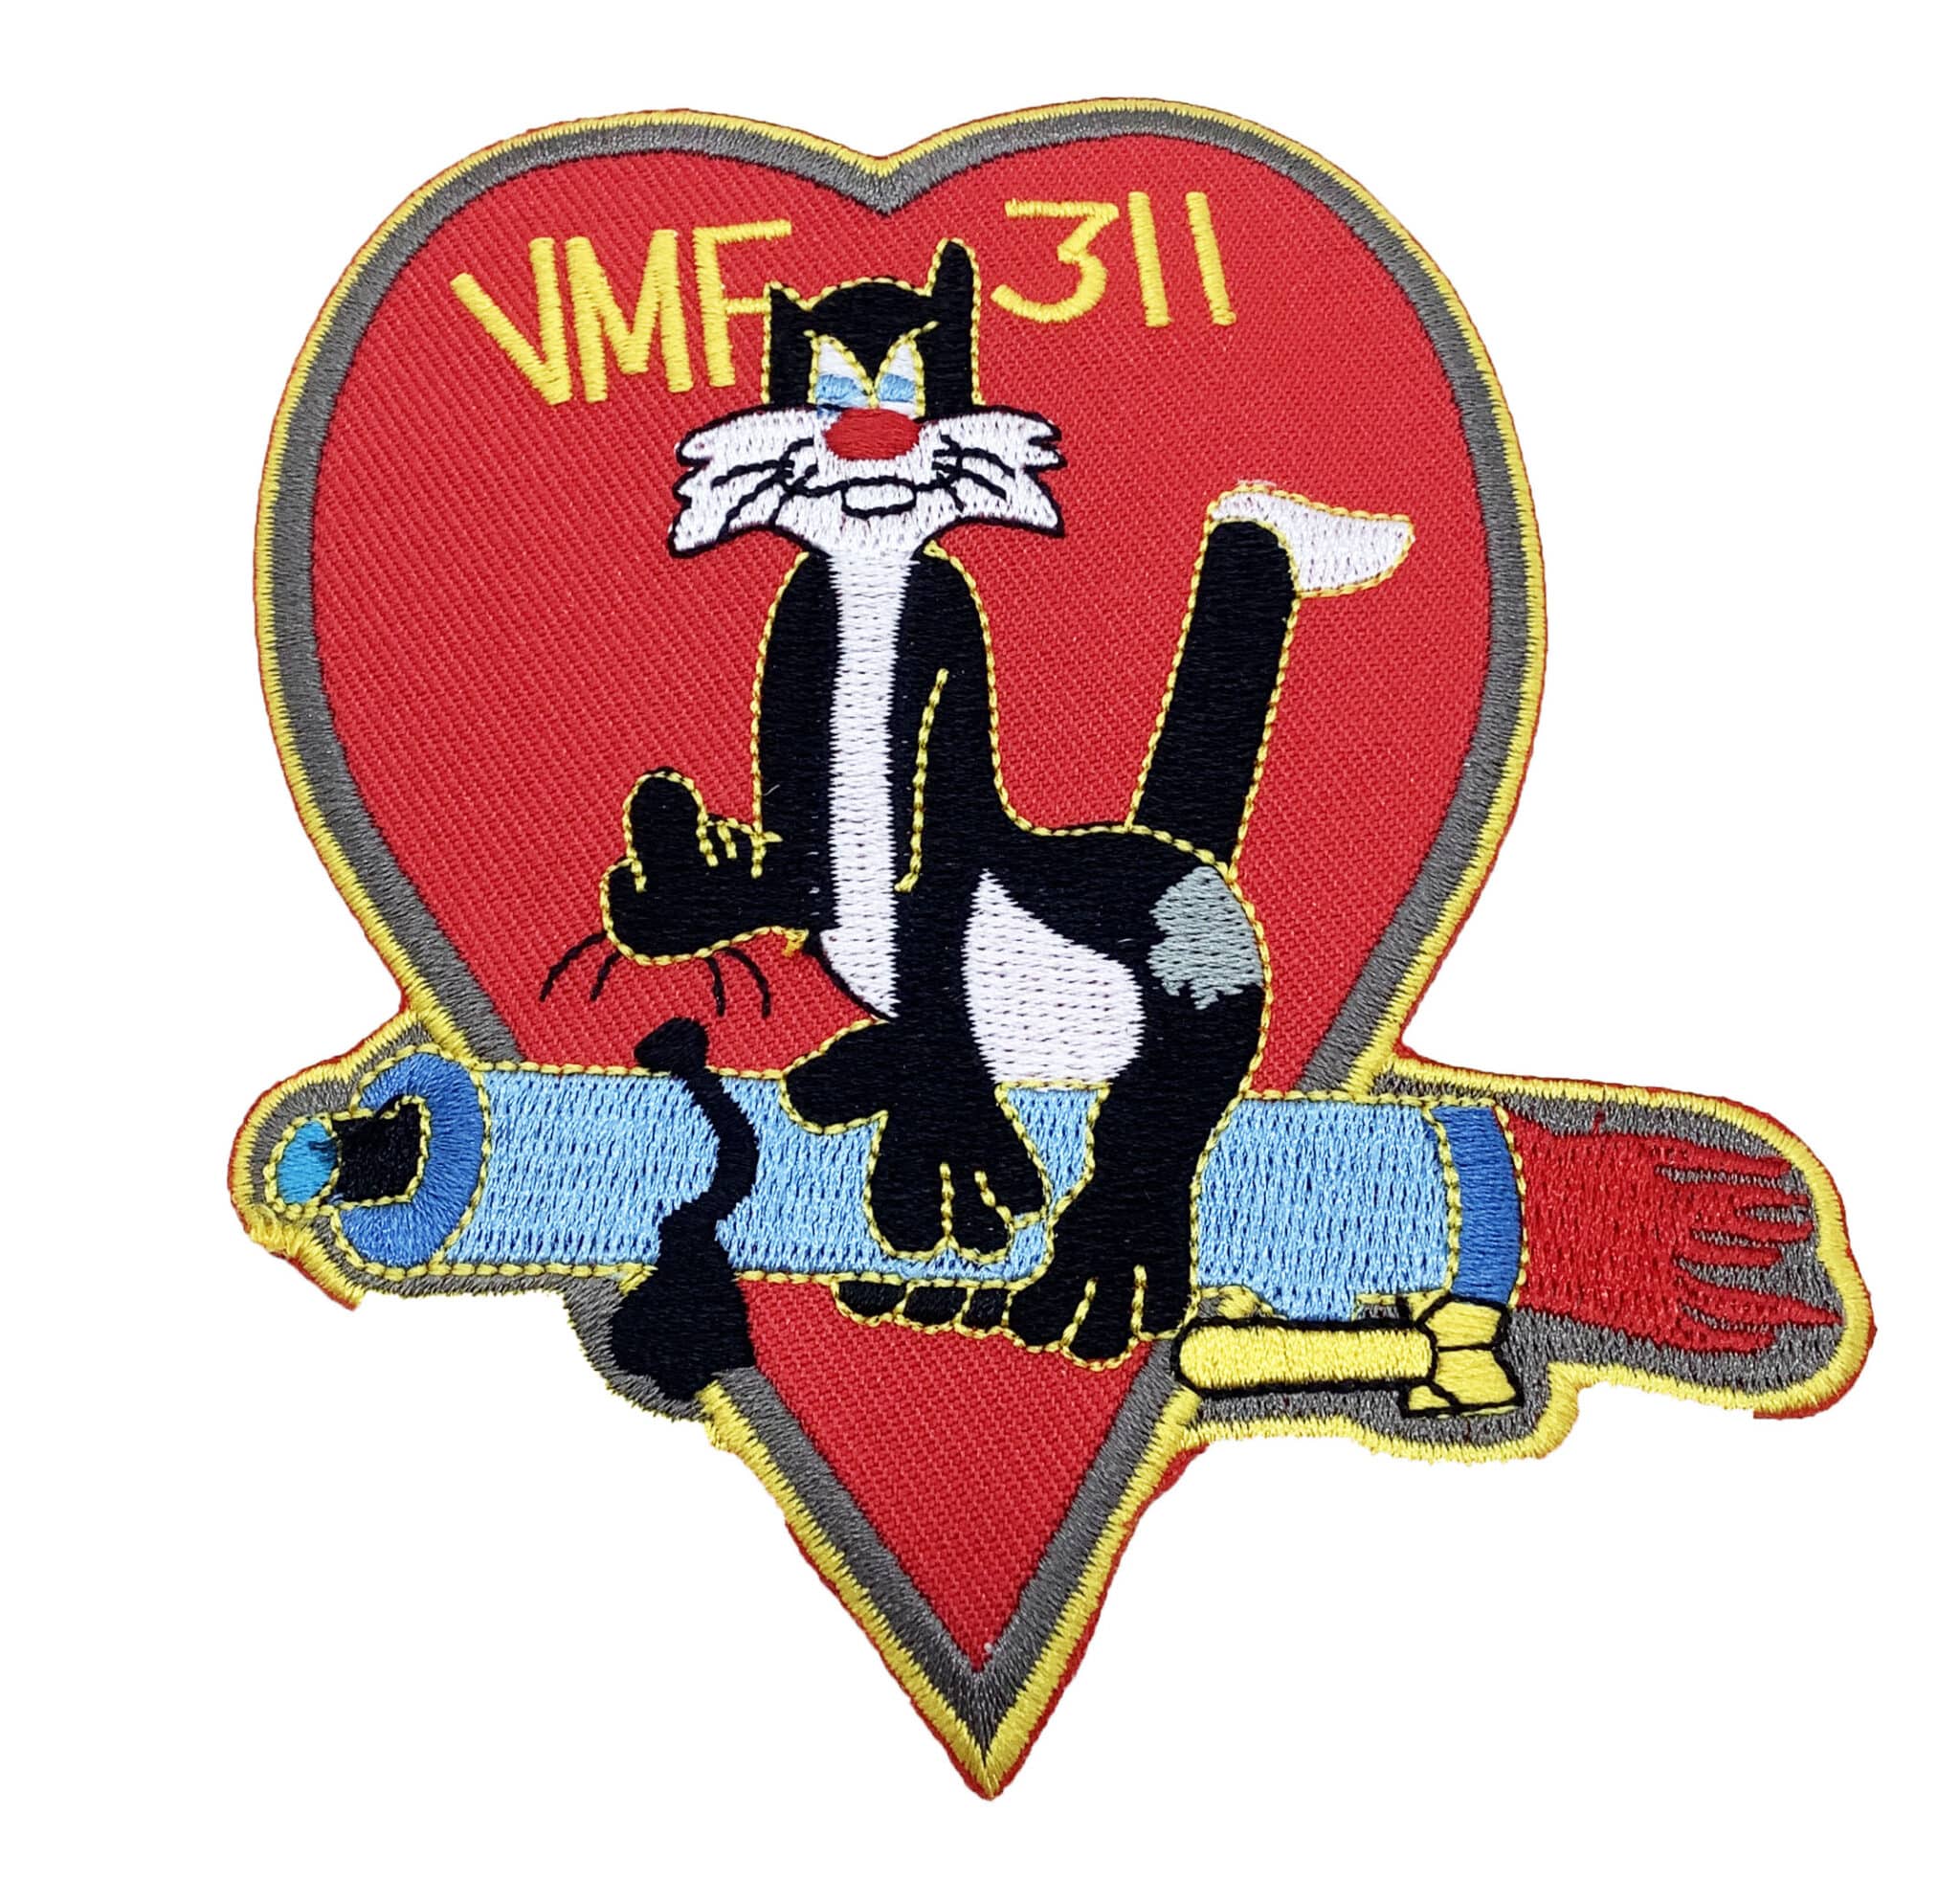 VMF-311 Tomcats Squadron Patch – Plastic Backing